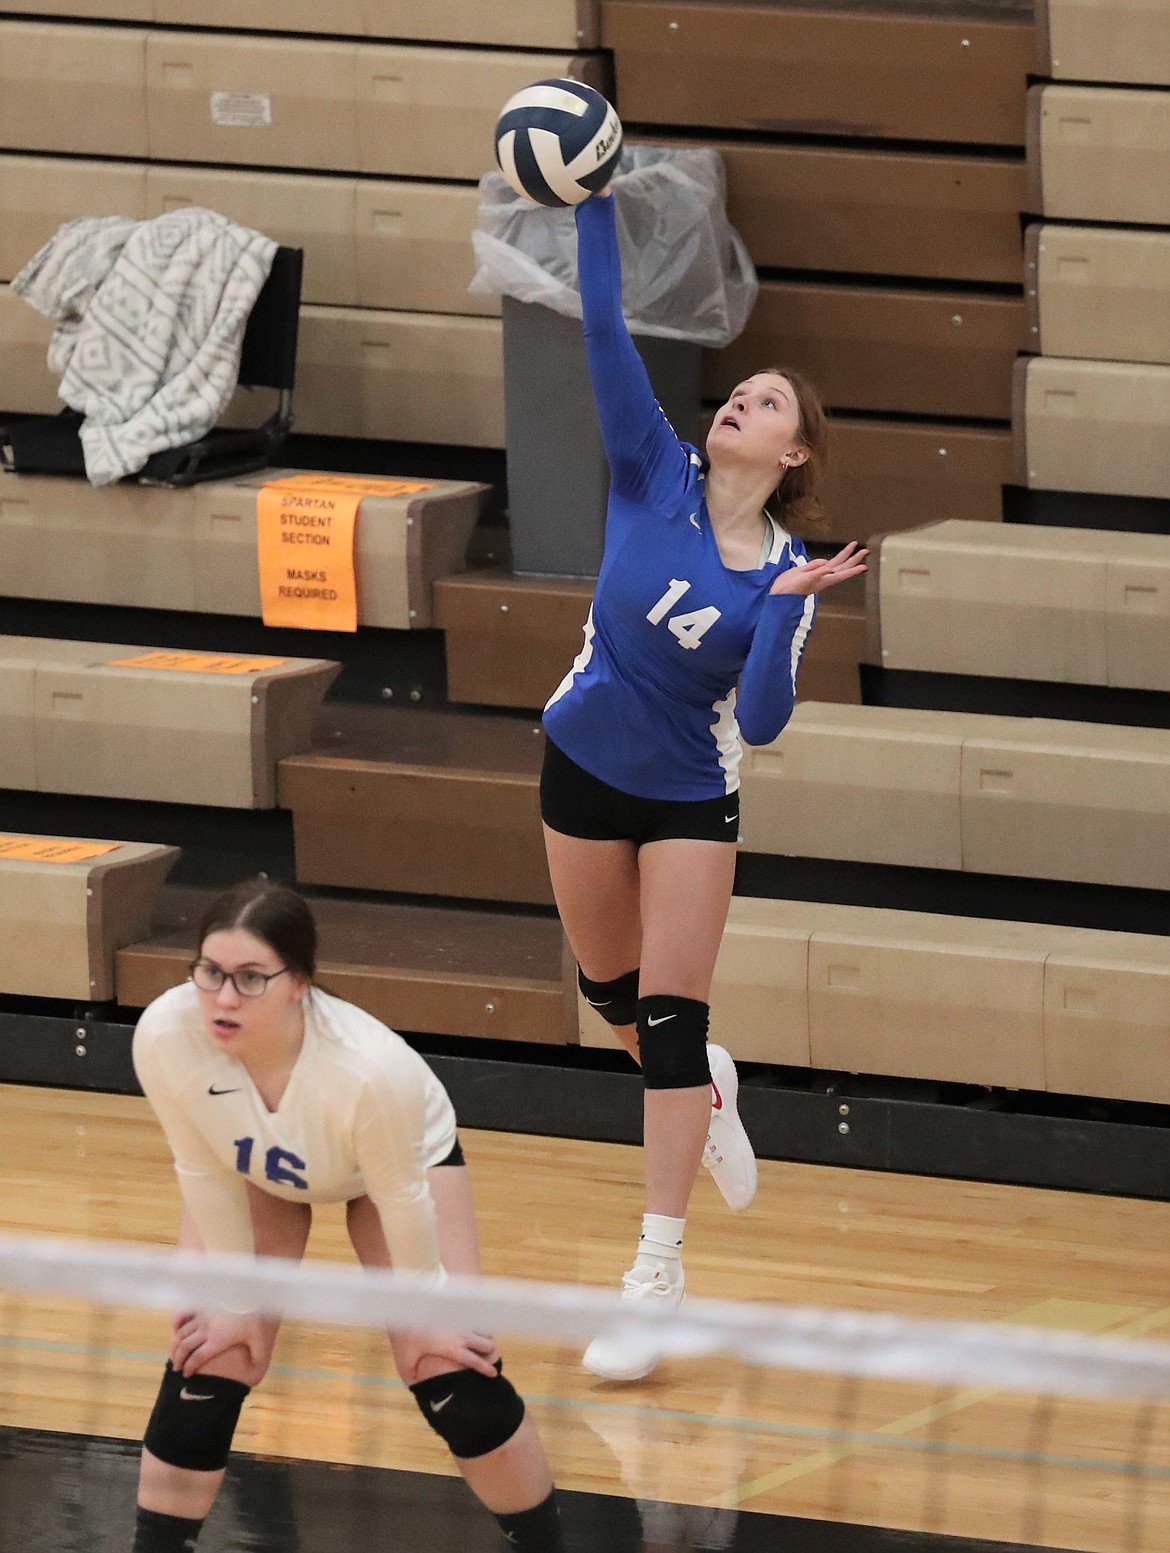 Kendall Hitchliff on River City's U16 team serves the ball on Sunday.